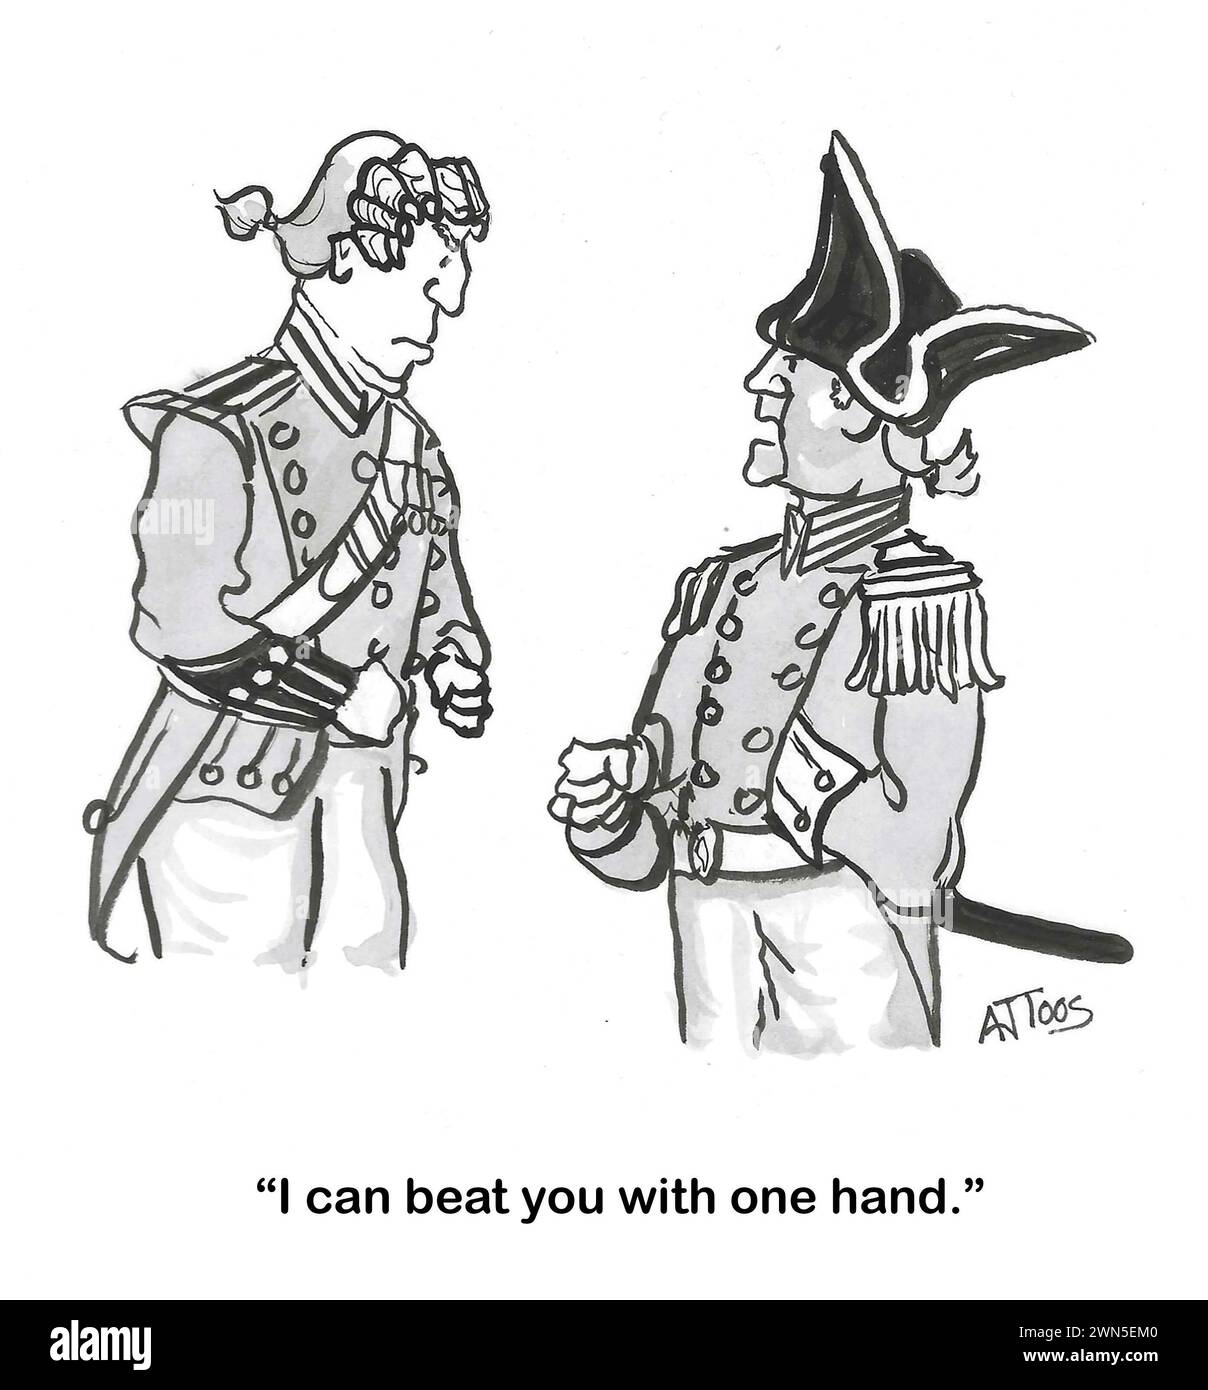 BW cartoon of two soldiers, one is Napoleon, and he will fight his opponent with only one hand. Stock Photo